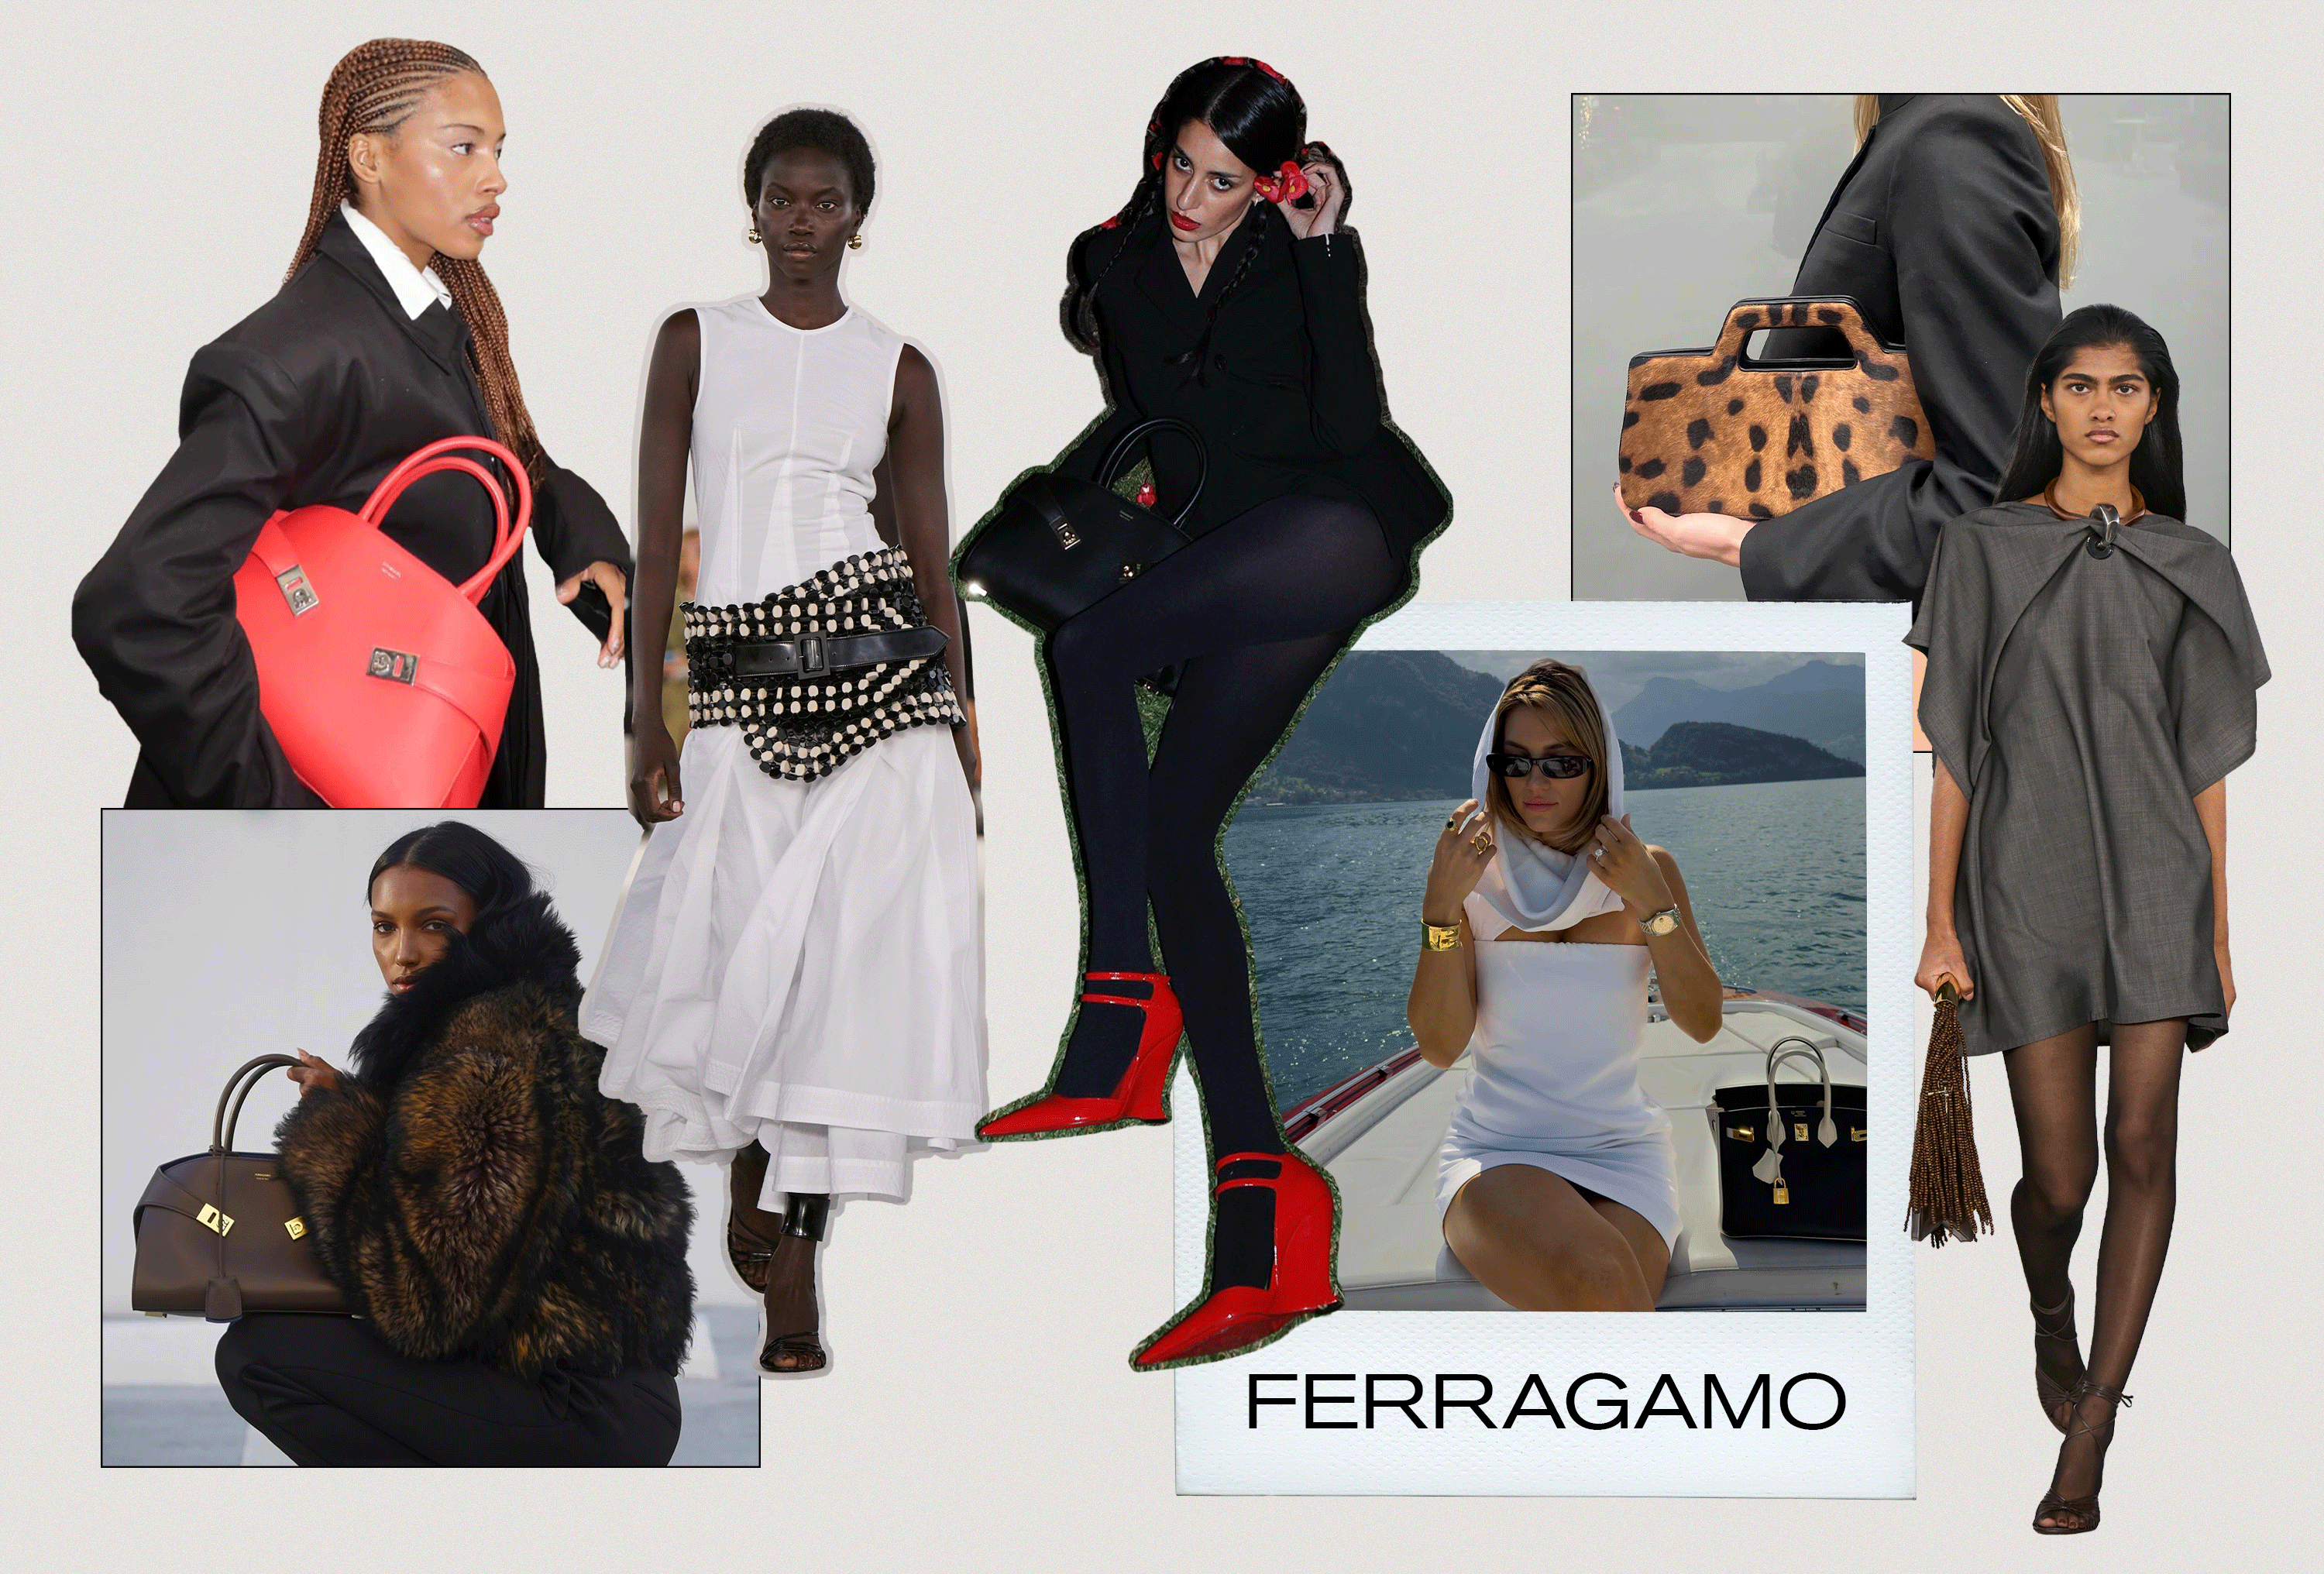 Celebrities, models and influencers wear pieces from Ferragamo